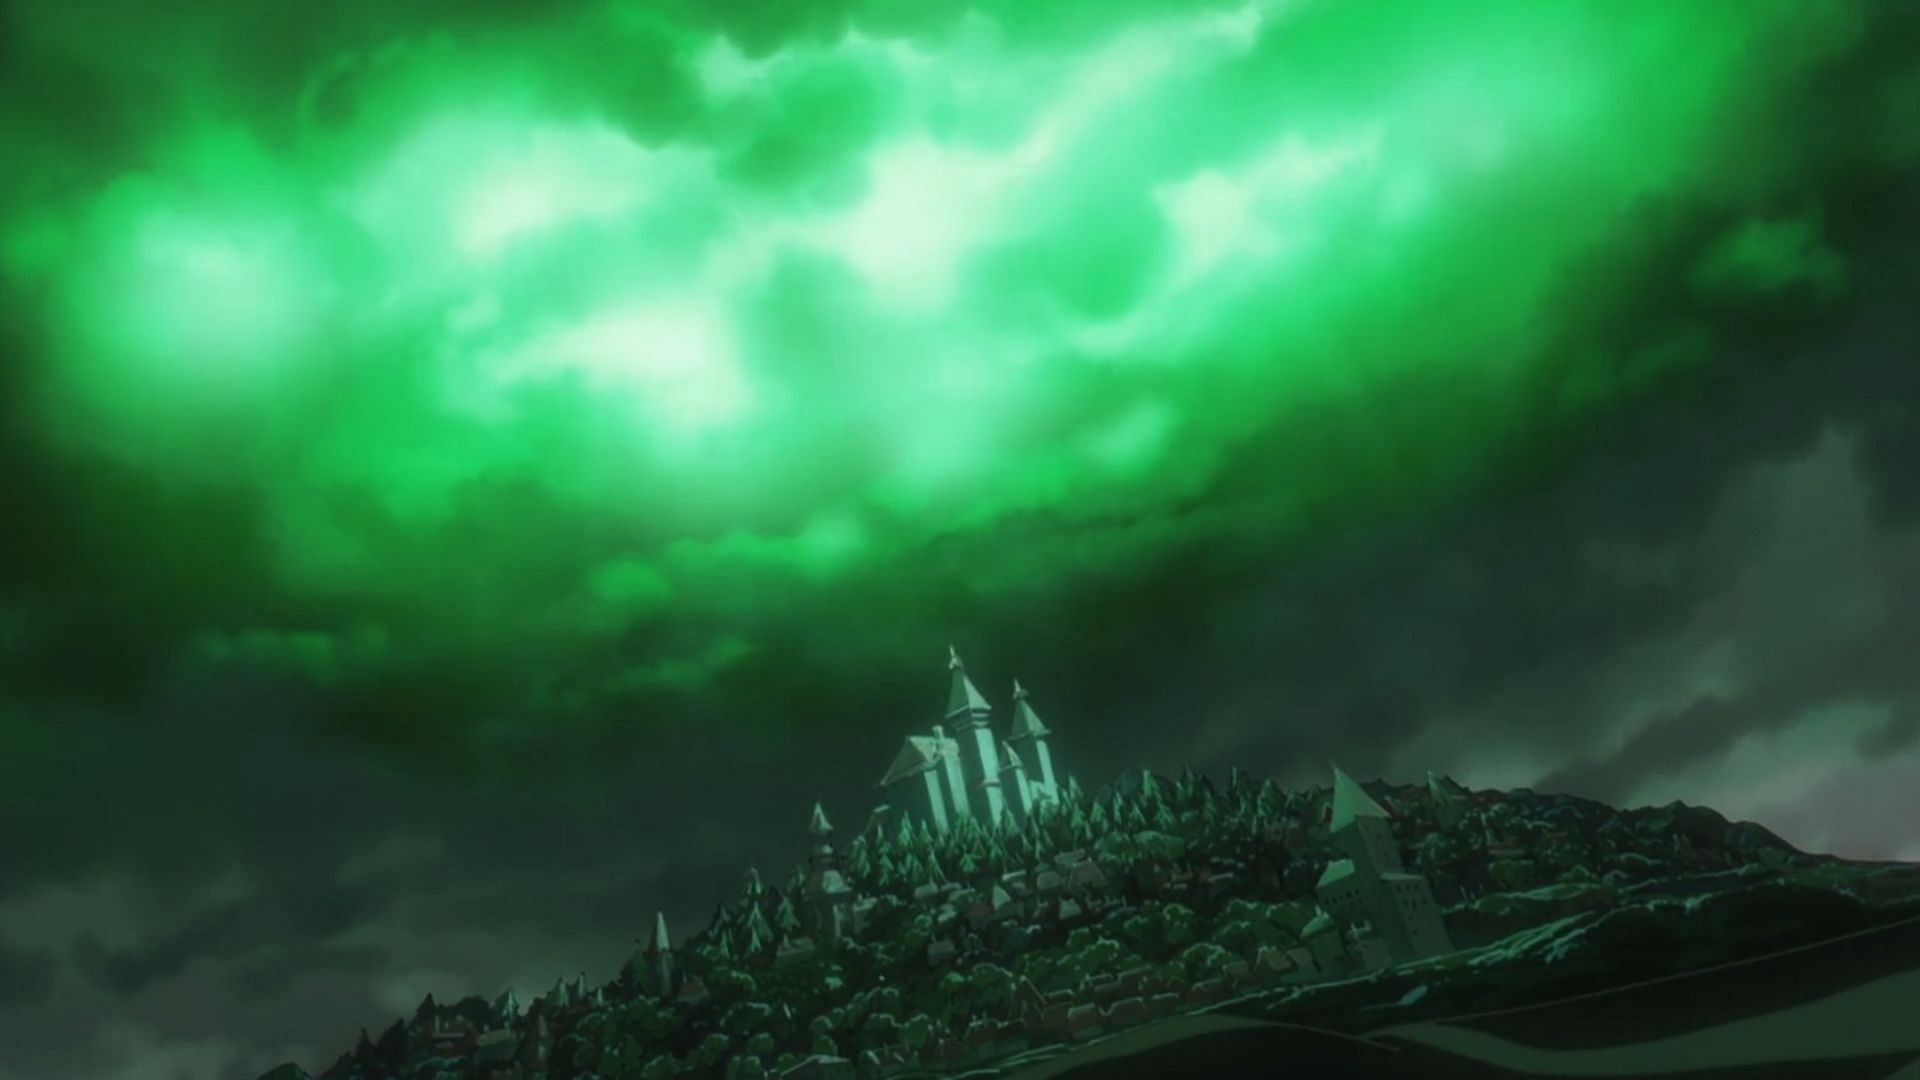 Kingdom of Lulusia under attack as seen in One Piece episode 1089 (Image via Toei Animation)